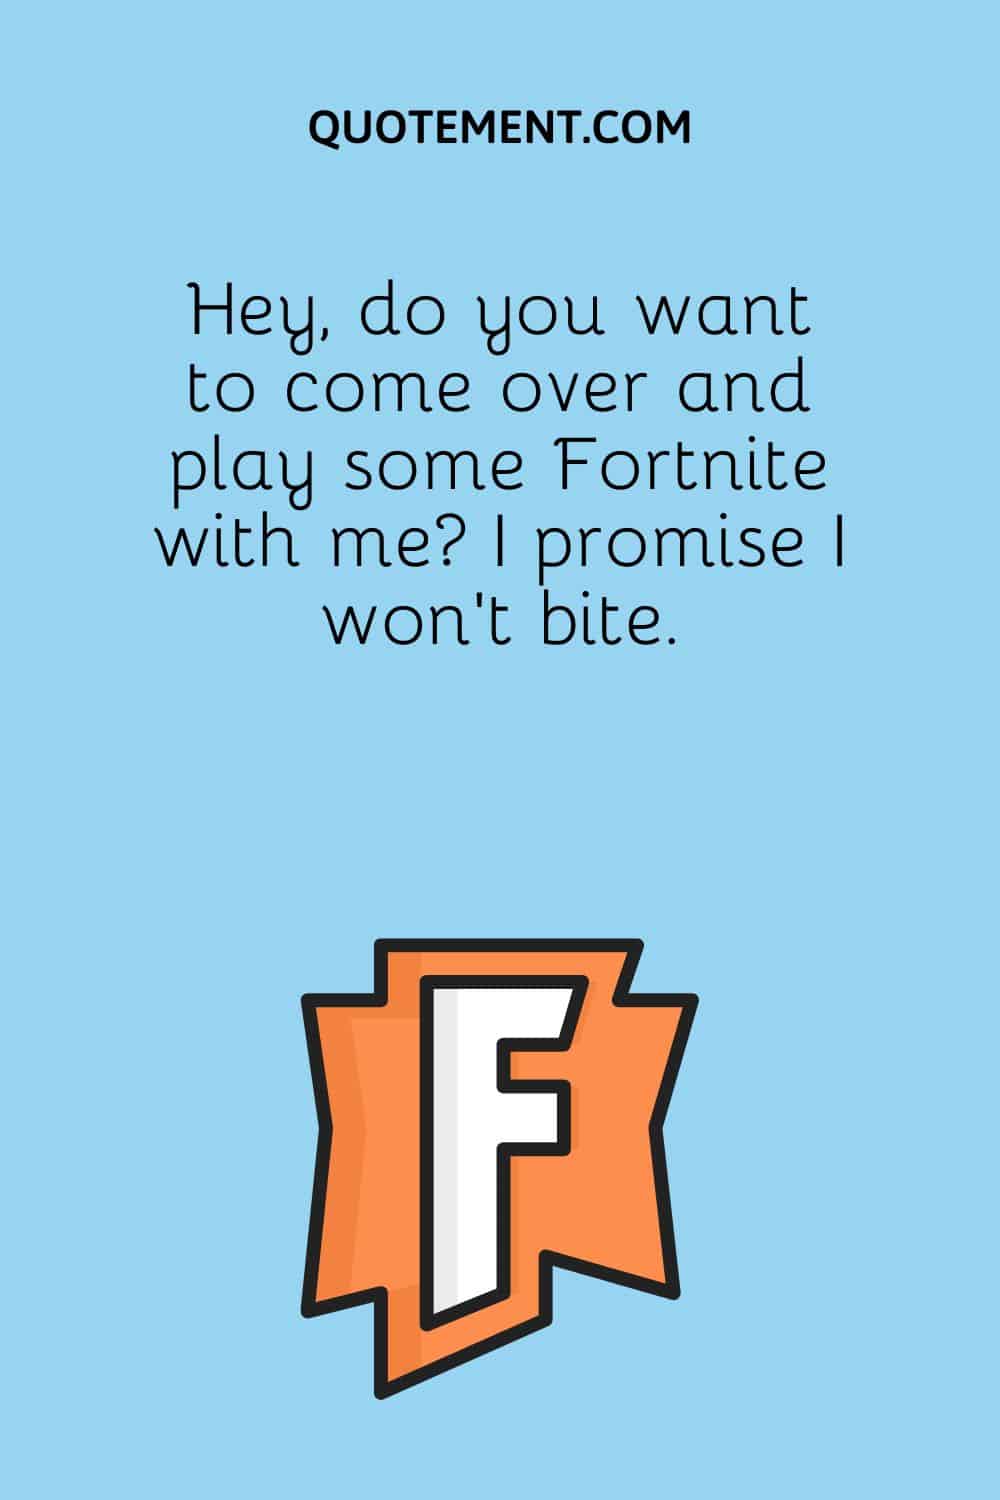 Hey, do you want to come over and play some Fortnite with me